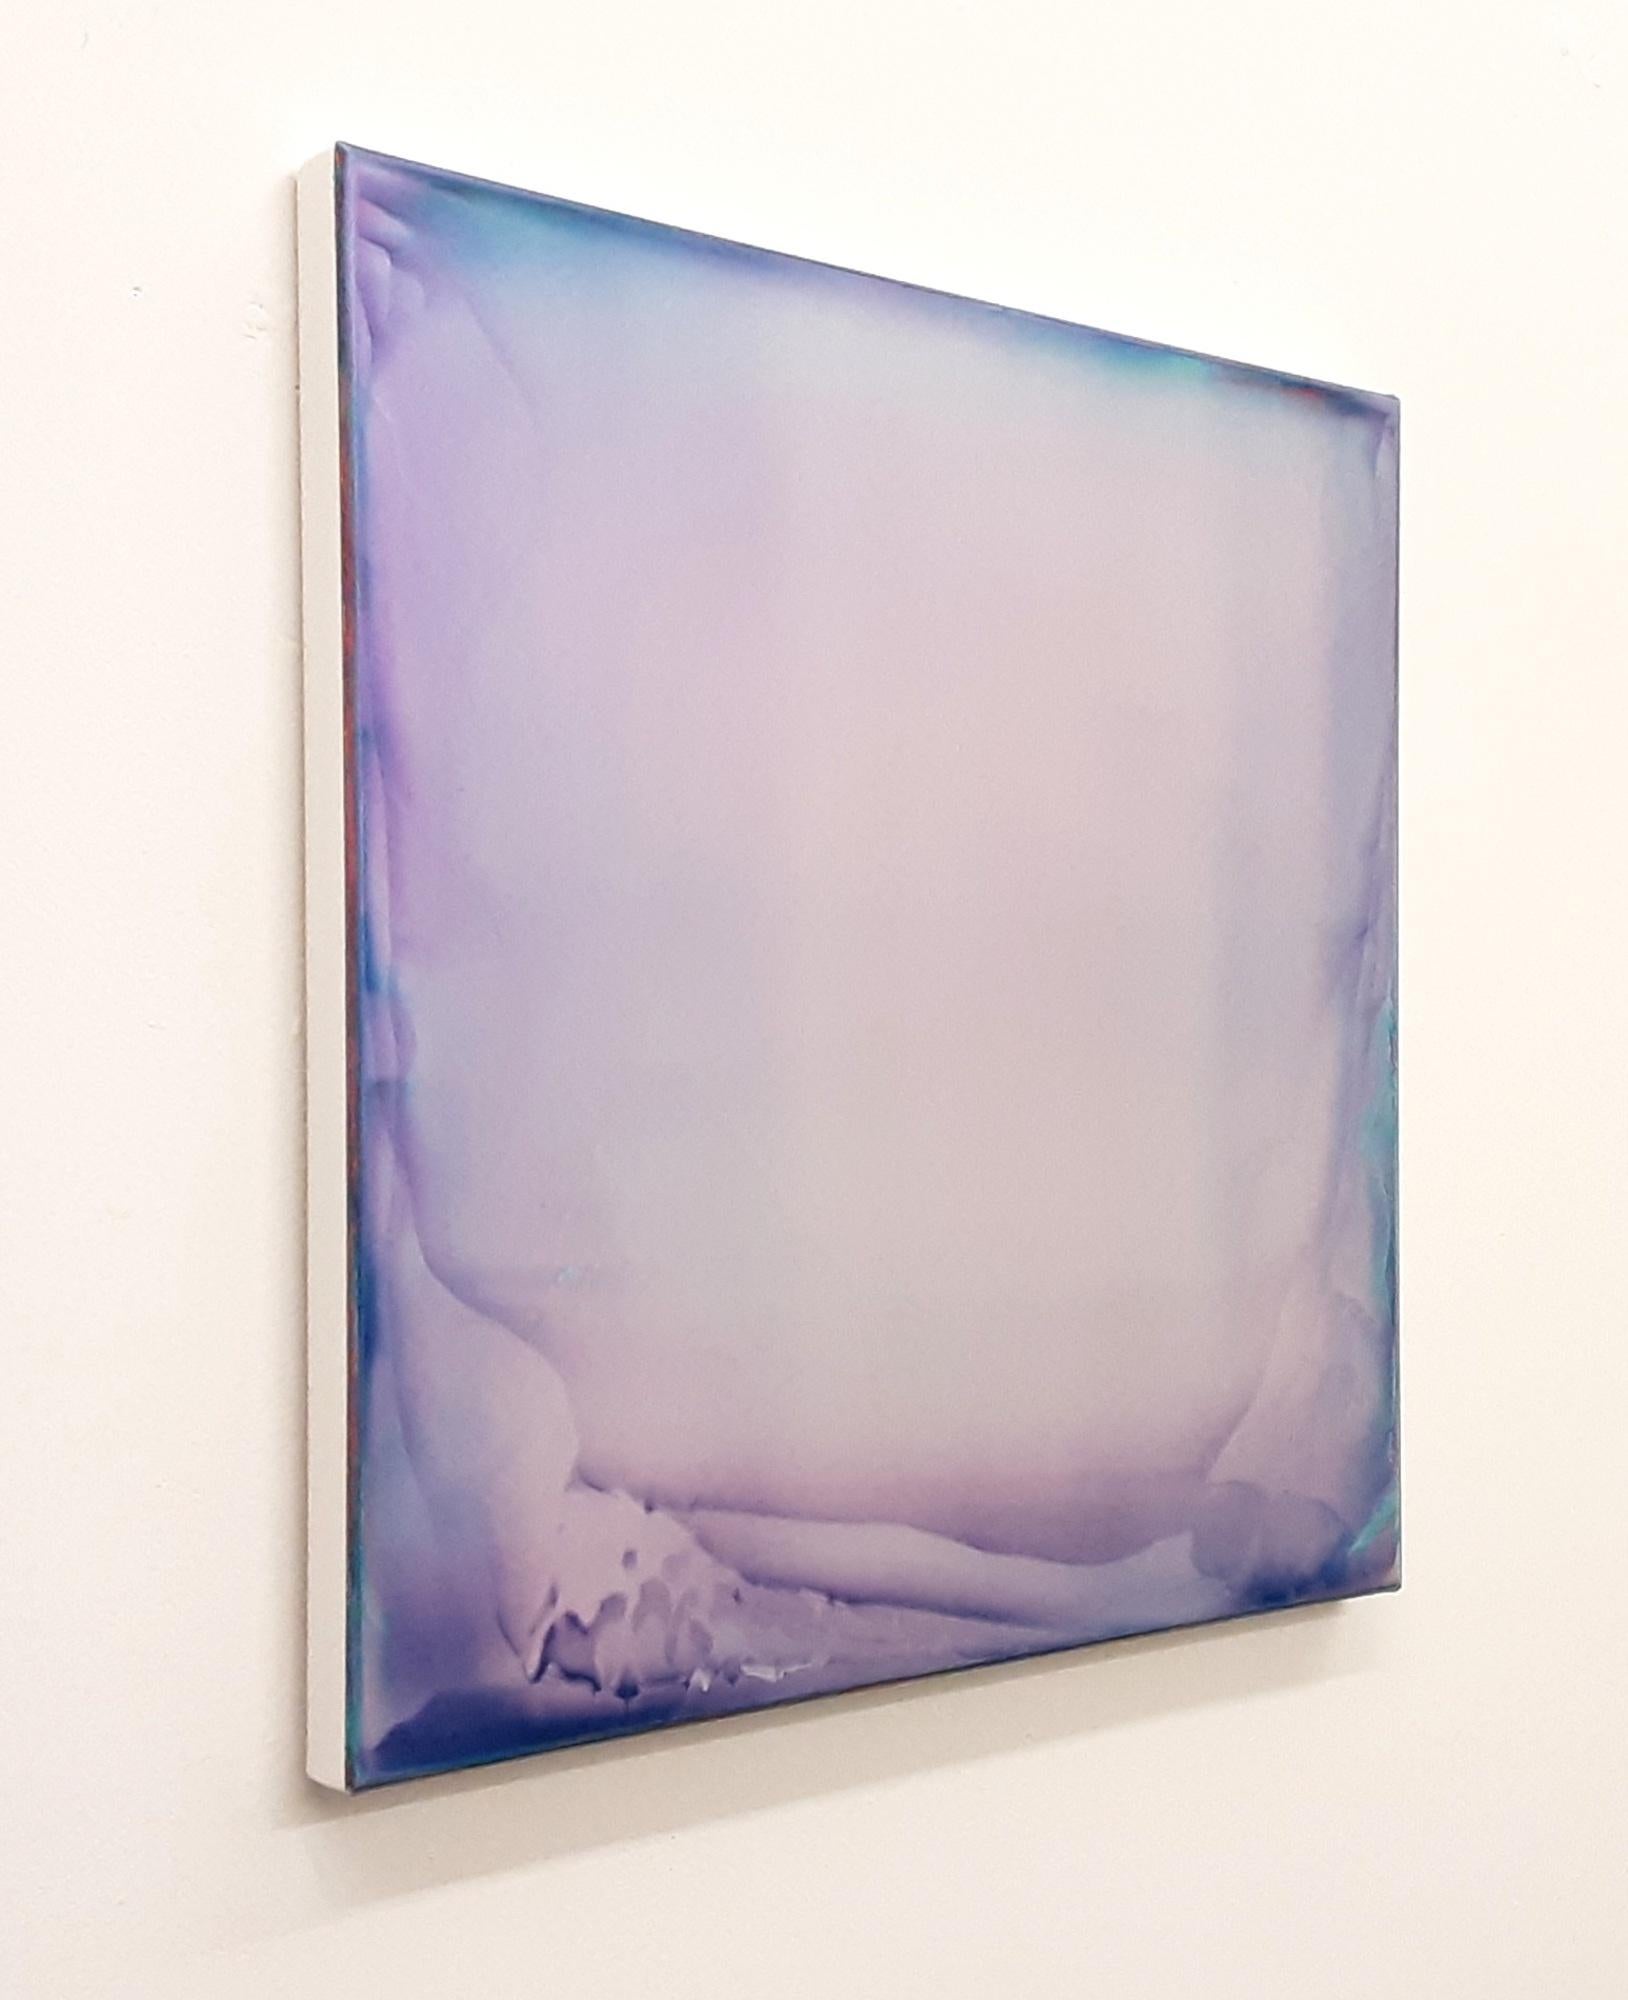 Resonance (1/22) by James Lumsden - Abstract colour painting, violet and blue For Sale 4